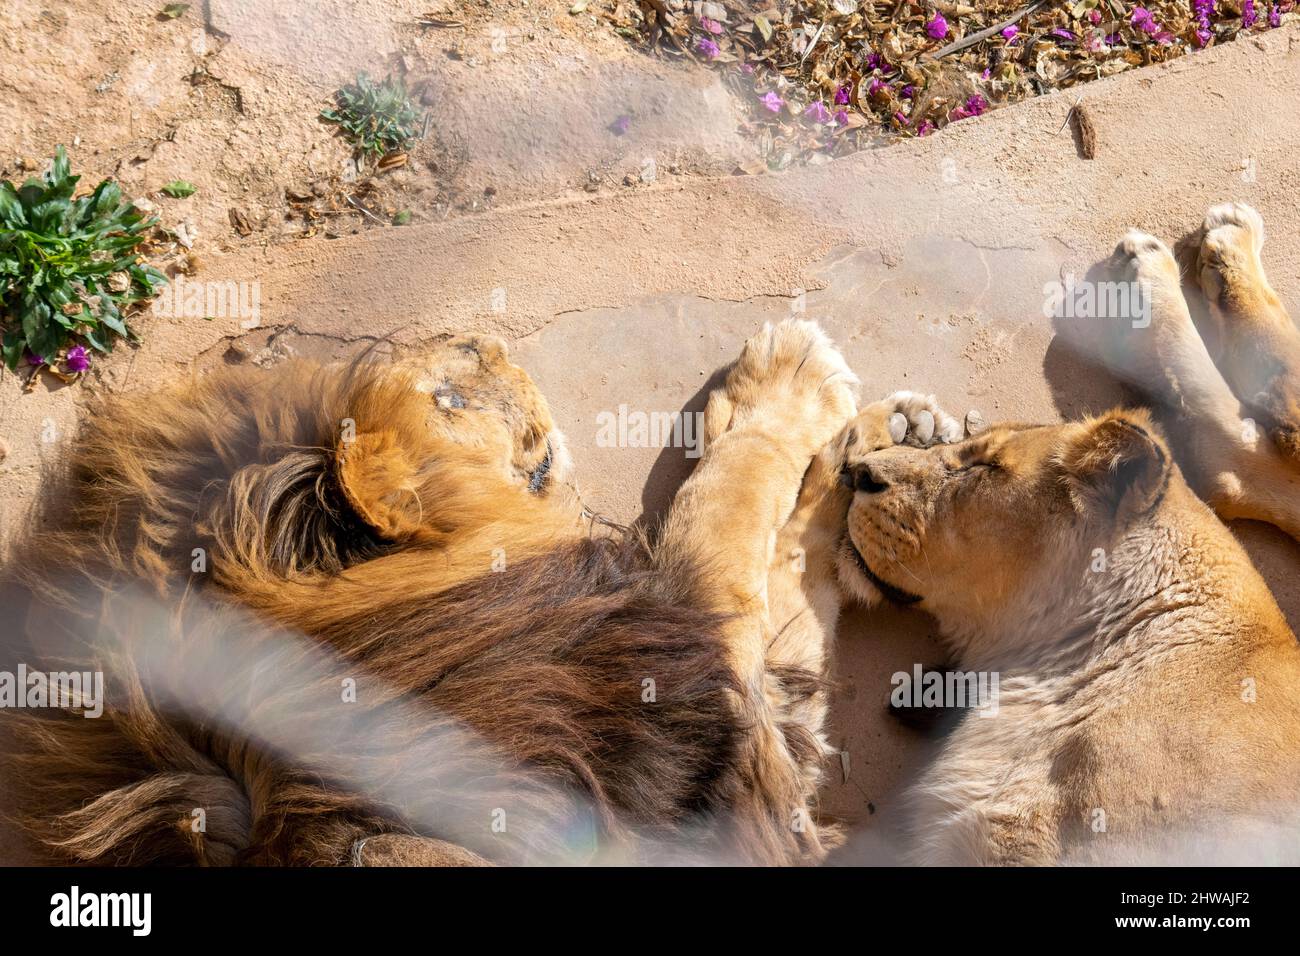 Lion couple resting at the sun. Lion couple in love. Lion hug. Stock Photo